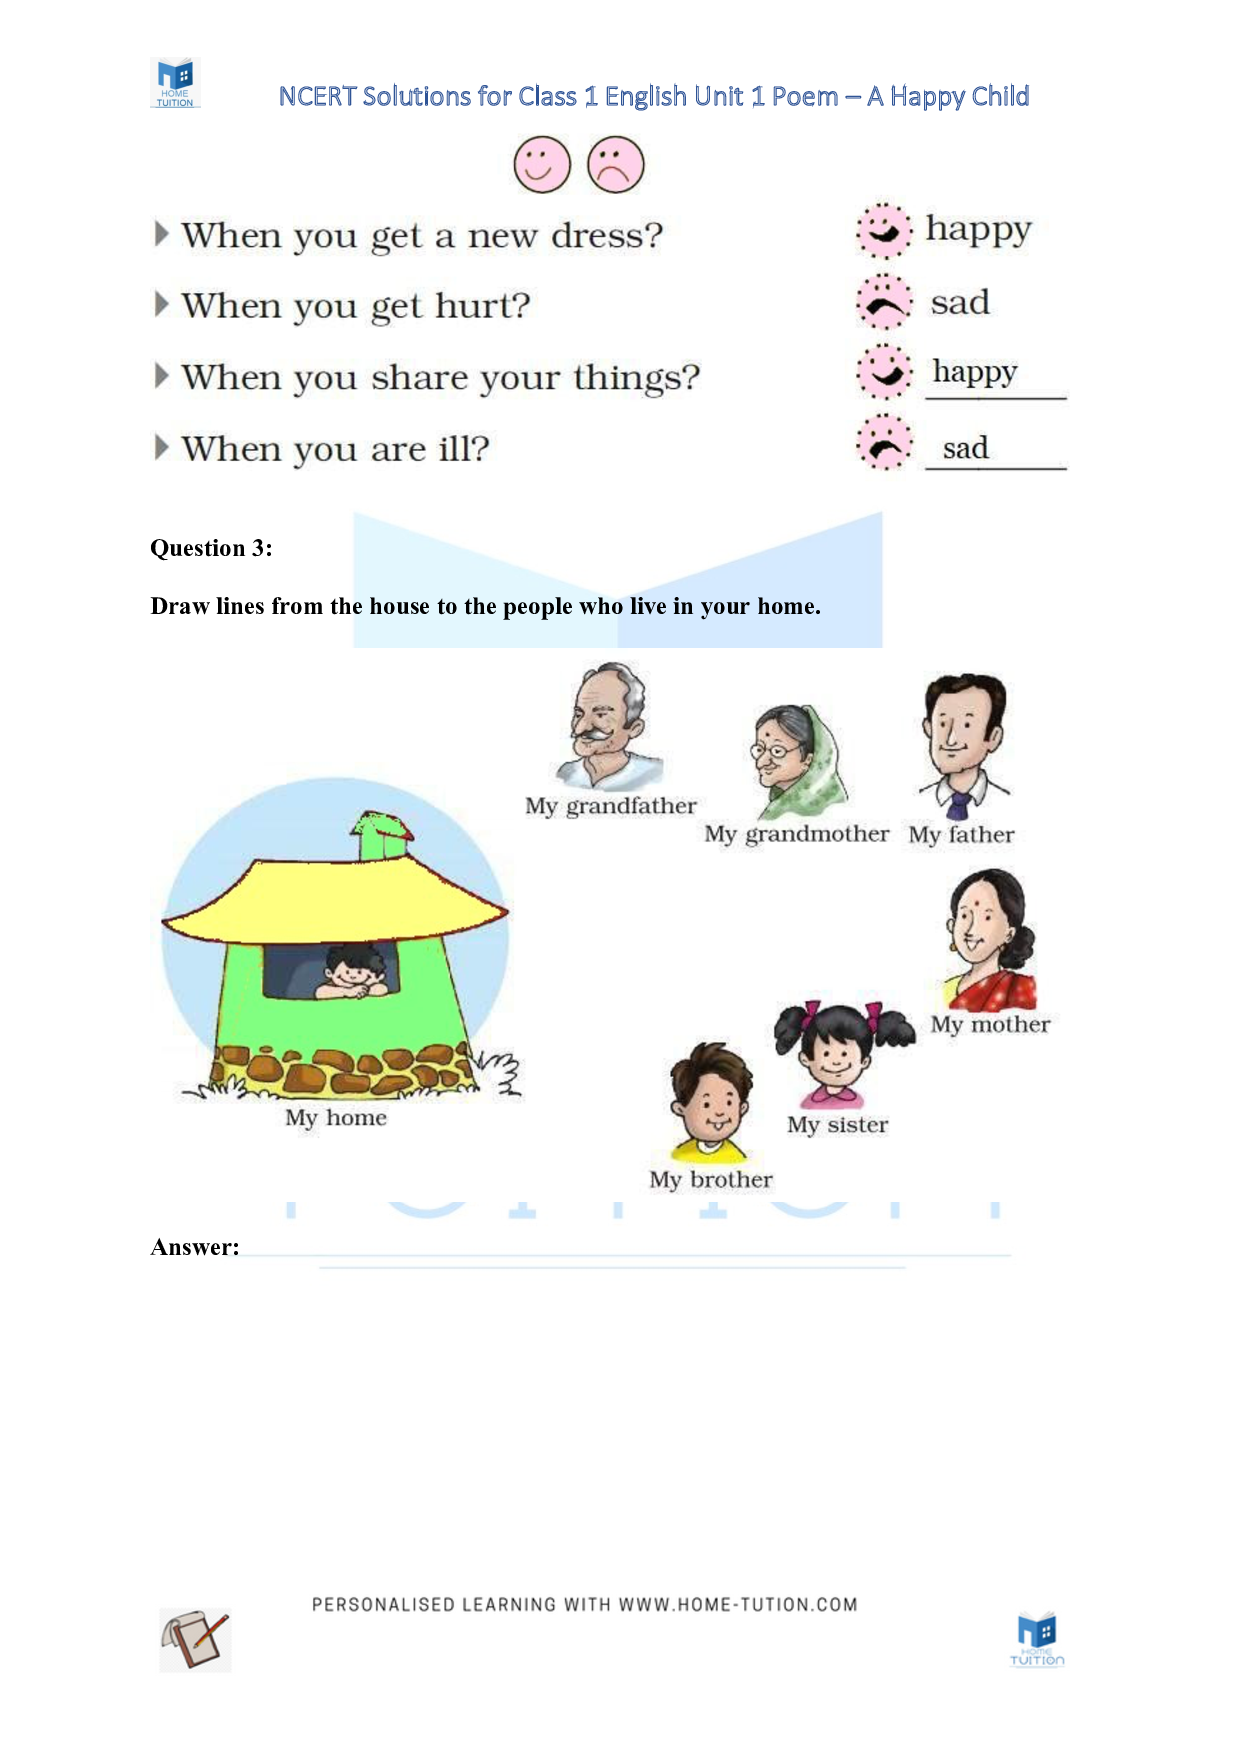 NCERT Solutions for Class 1 English Unit 1 Poem - A Happy Child